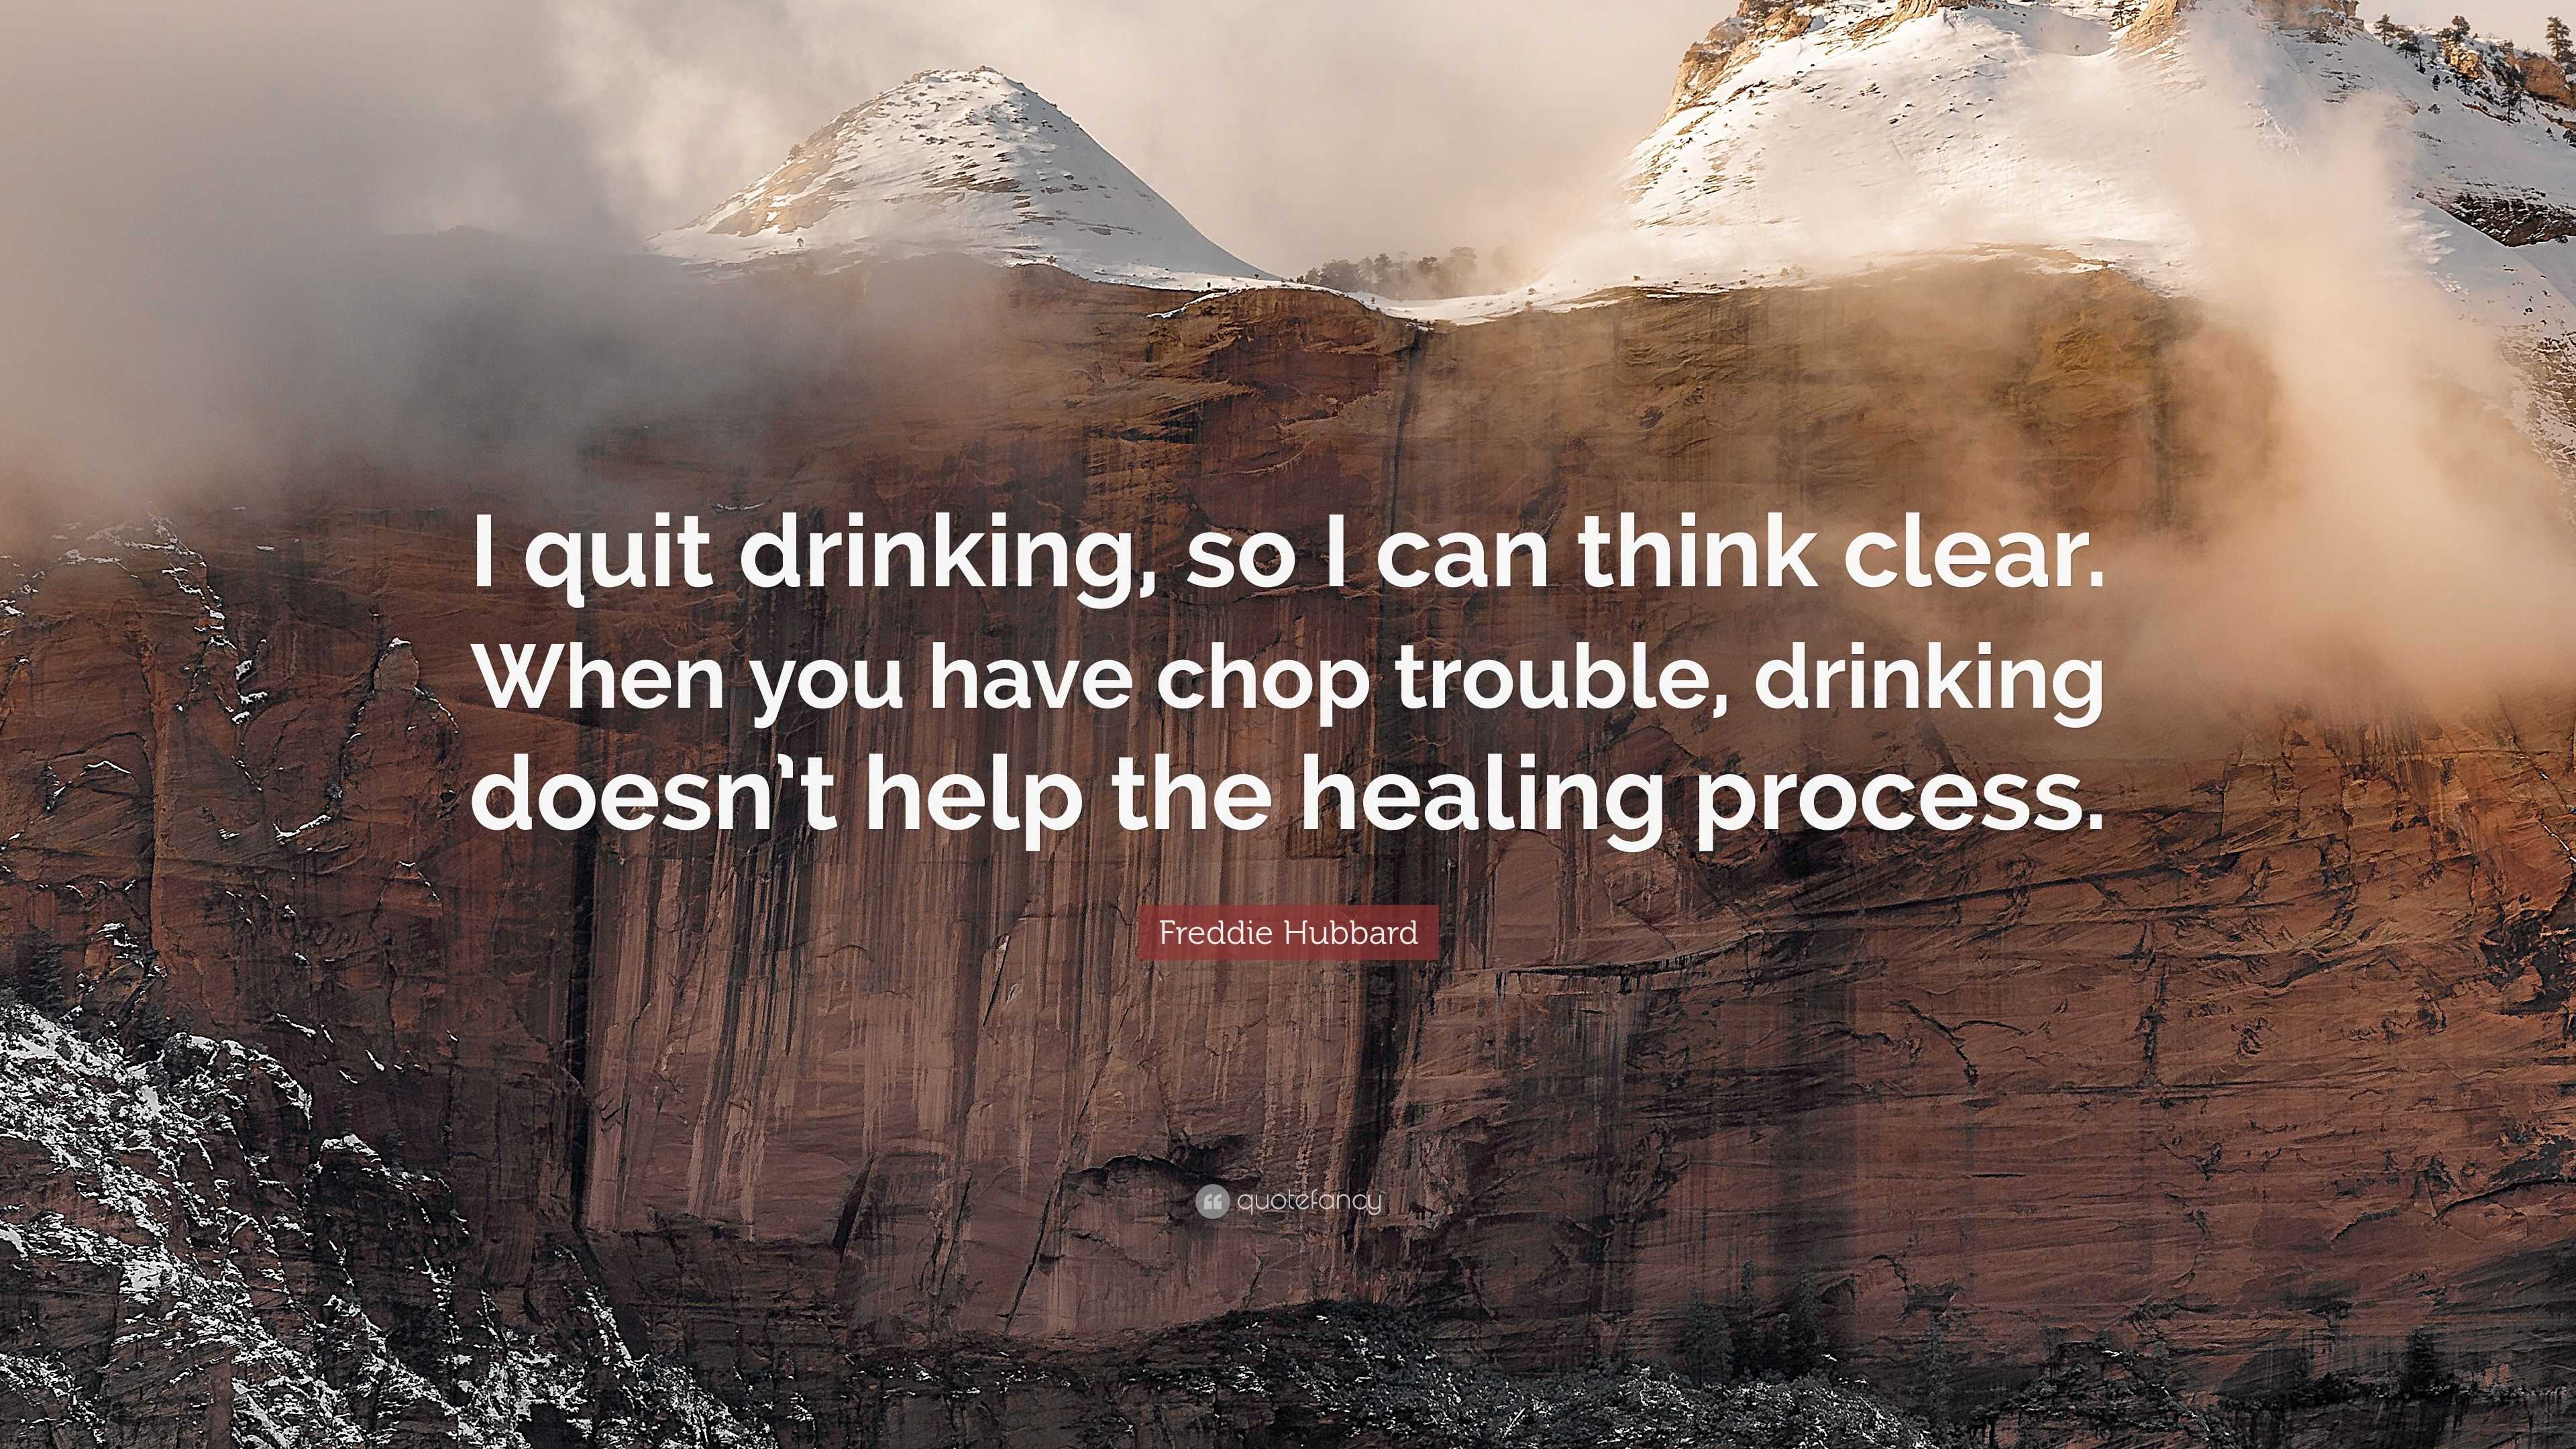 Freddie Hubbard Quote: “I quit drinking, so I can think clear. When you